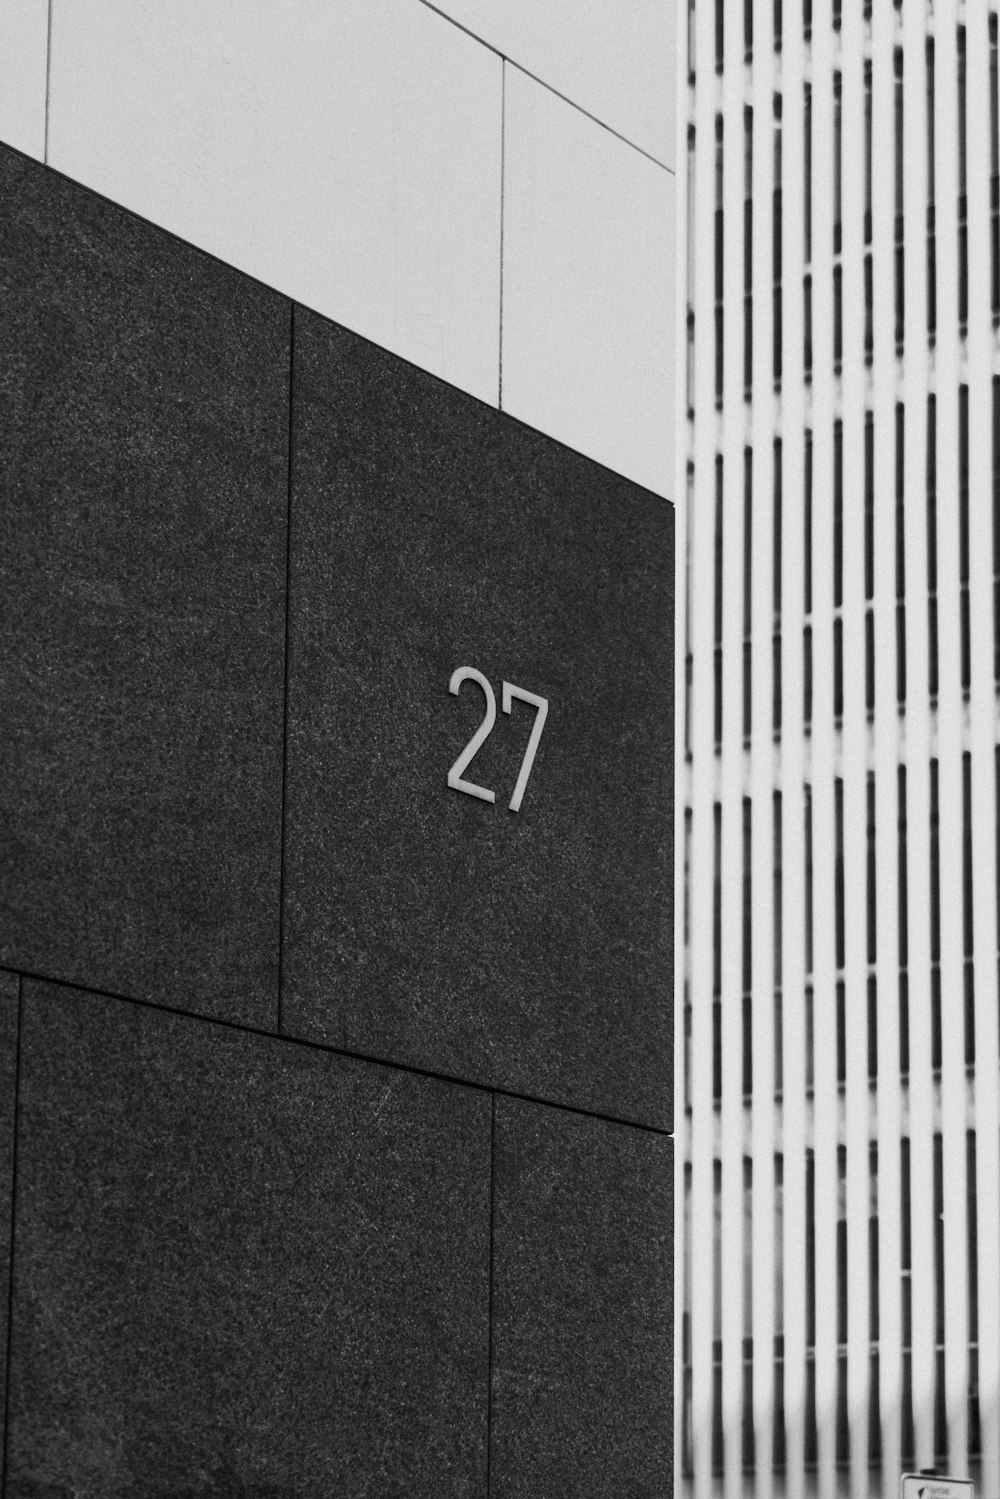 black and white wall with number 2